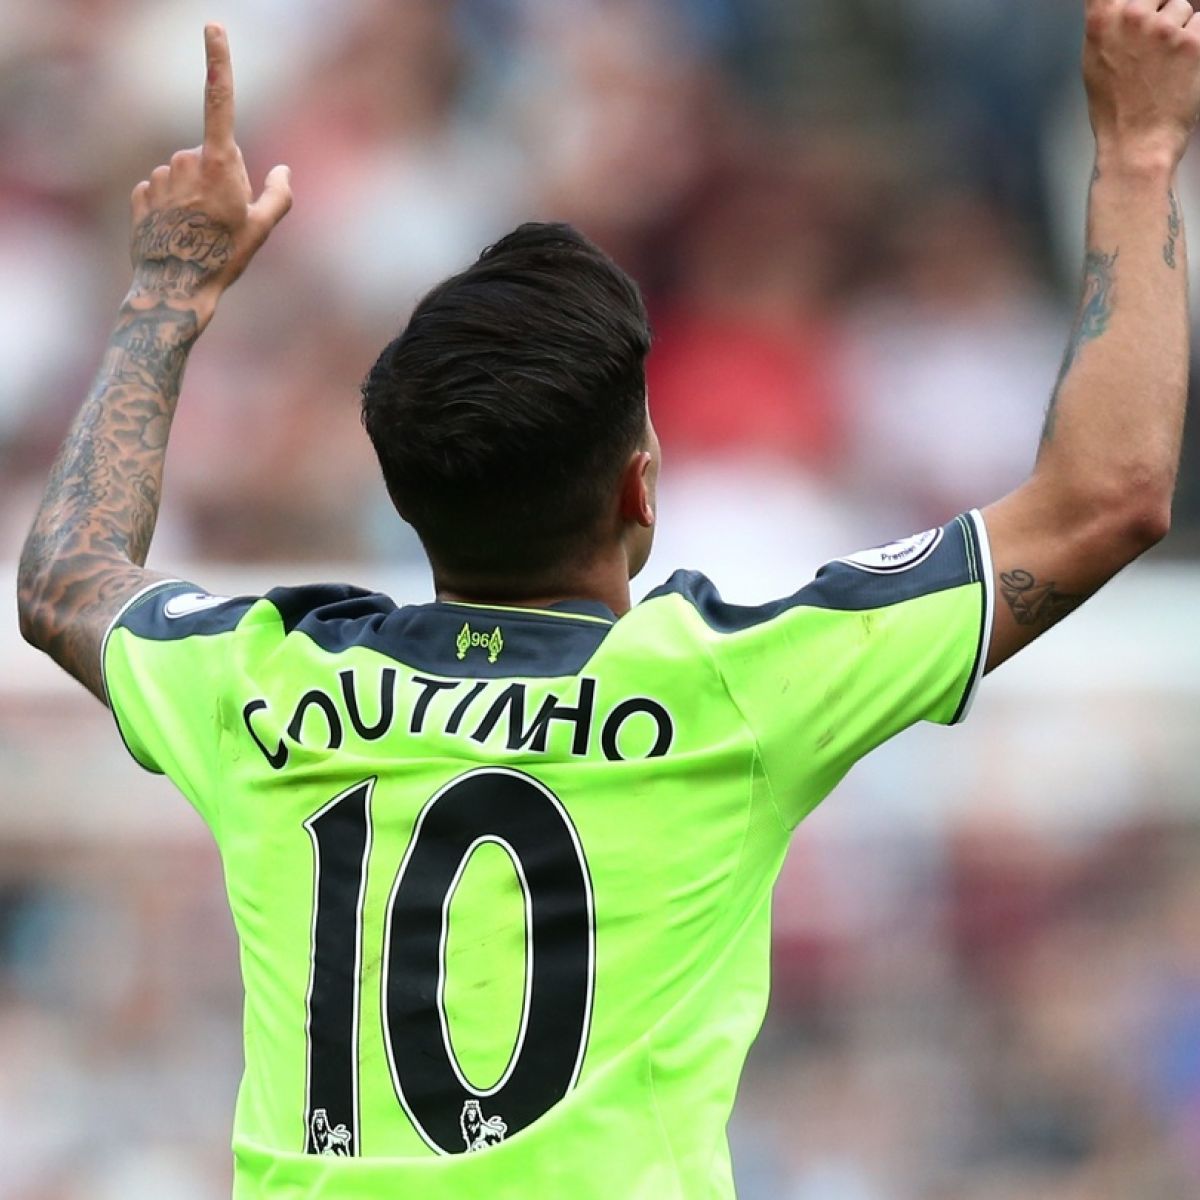 Philippe Coutinho is key for Liverpool and won't go easily